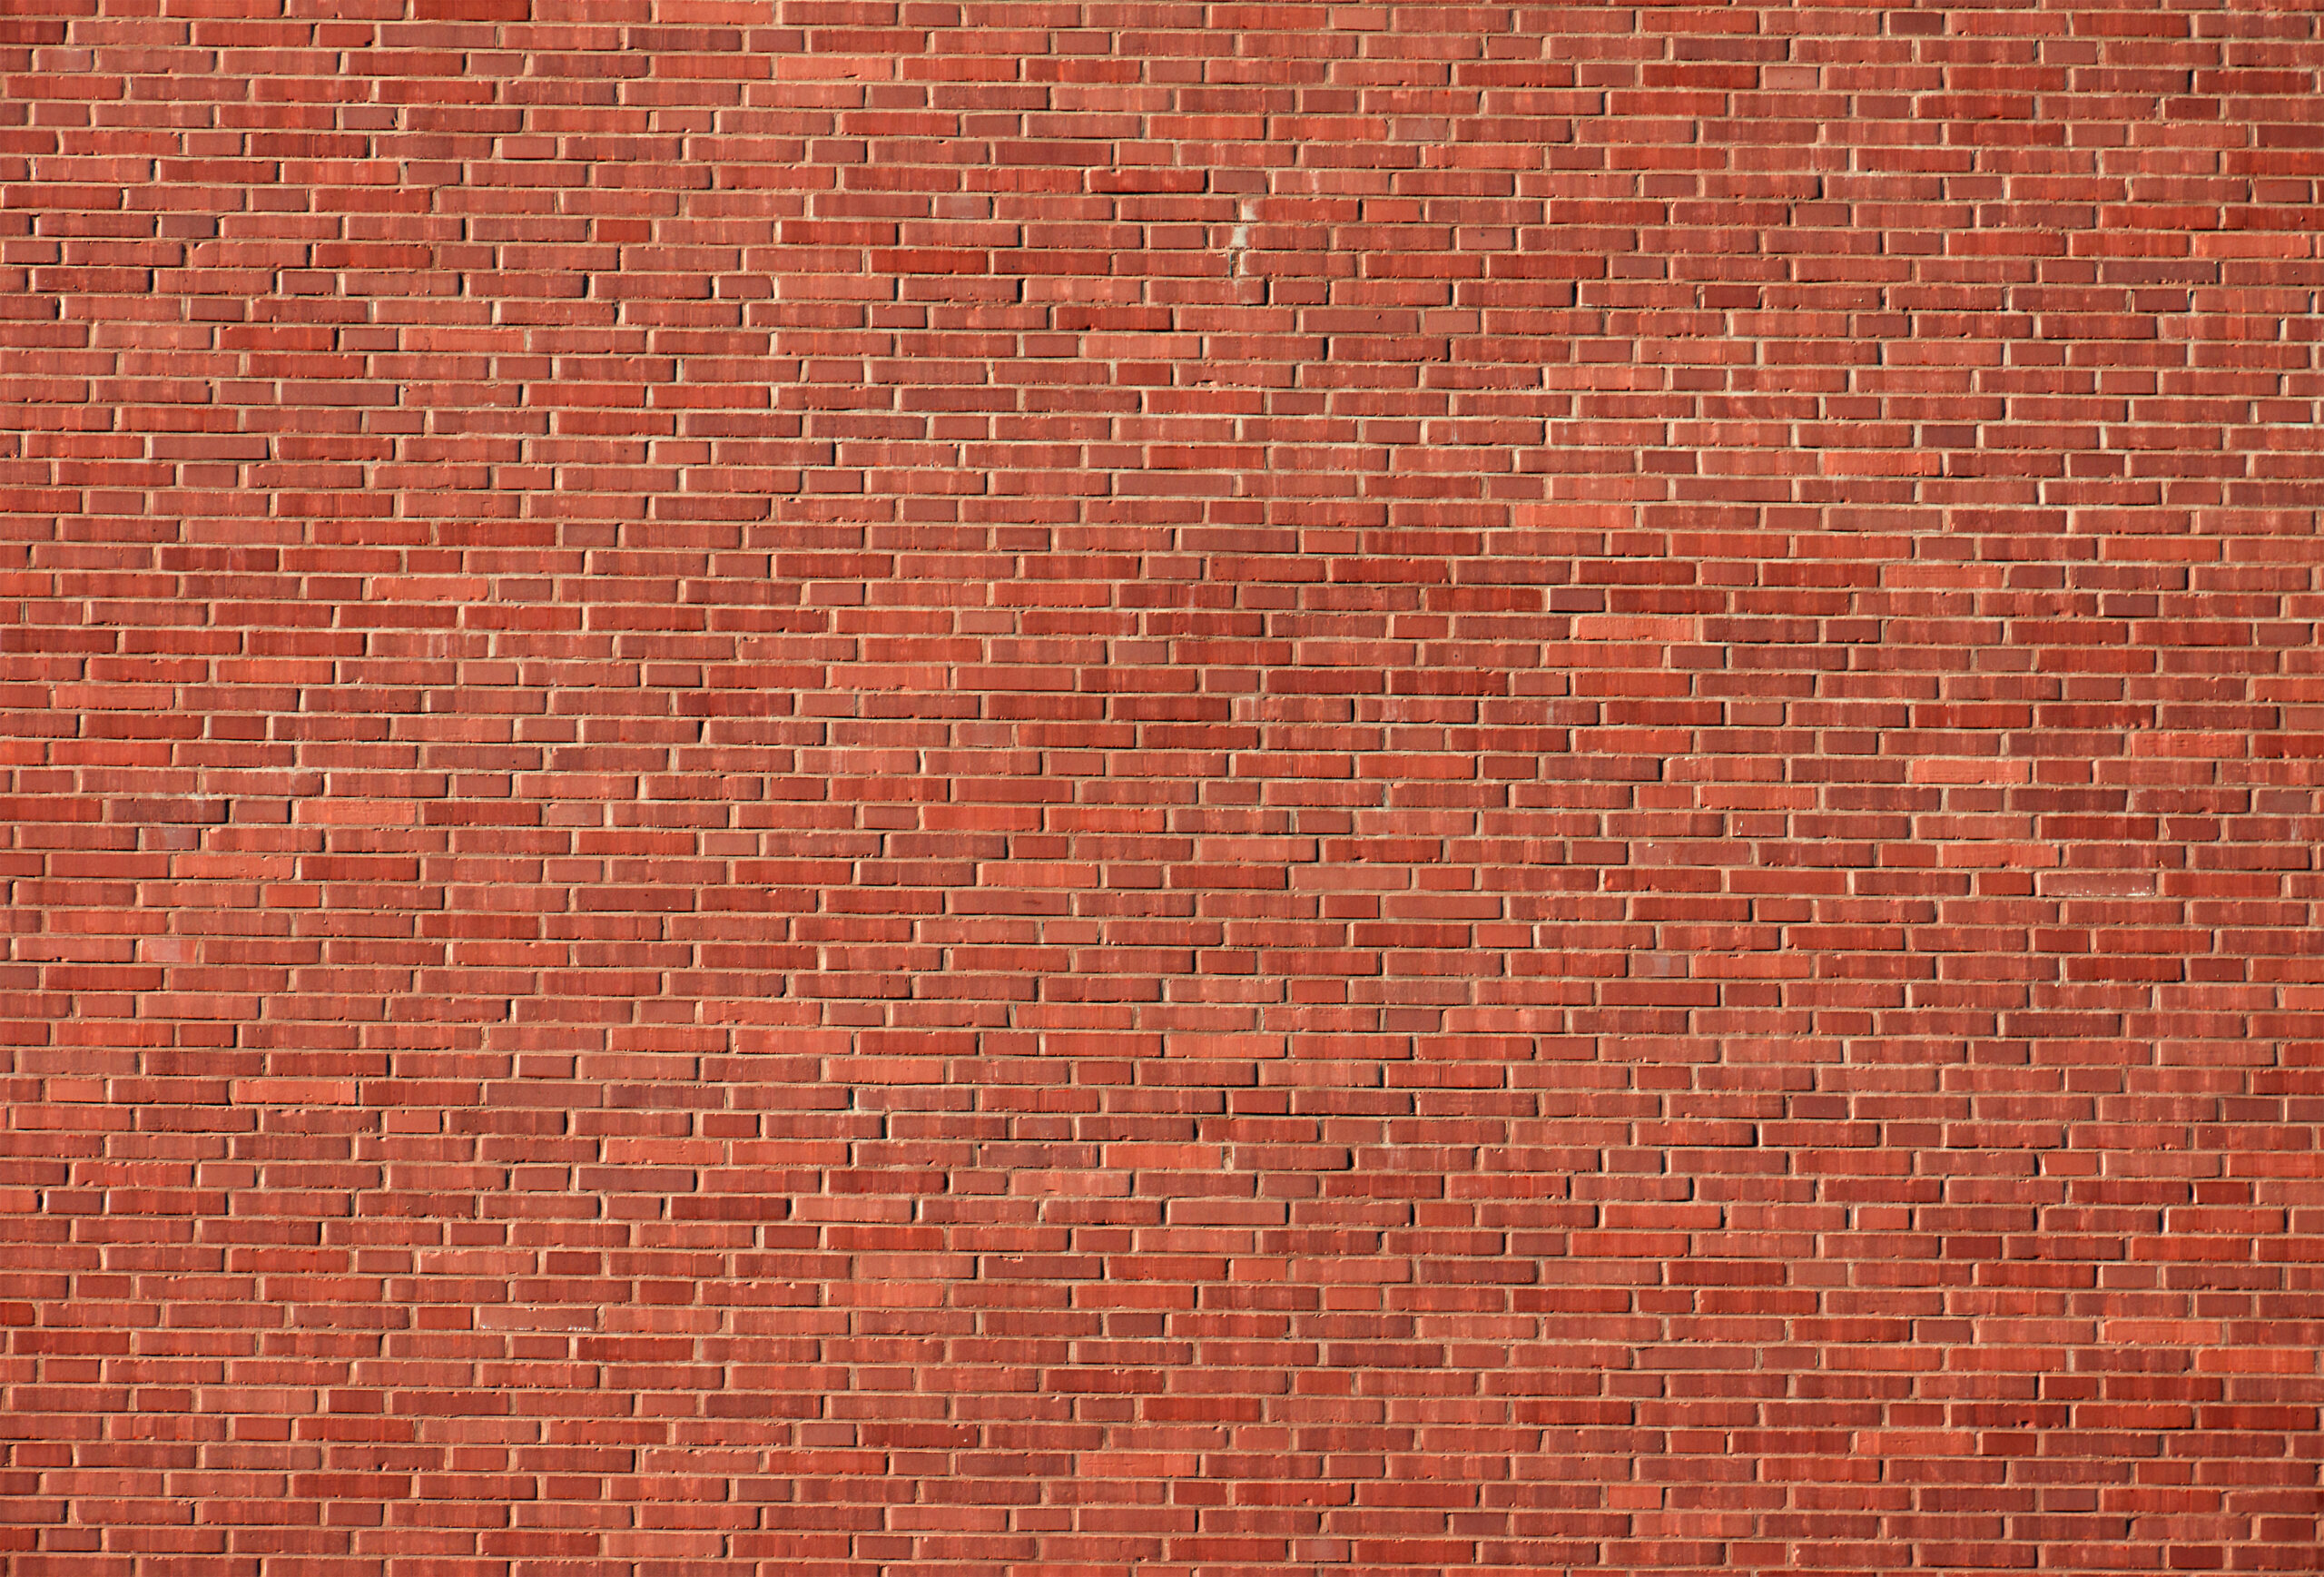 Close-up photo of brick staining results, showcasing the rich, warm tones and enhanced texture of the stained bricks.